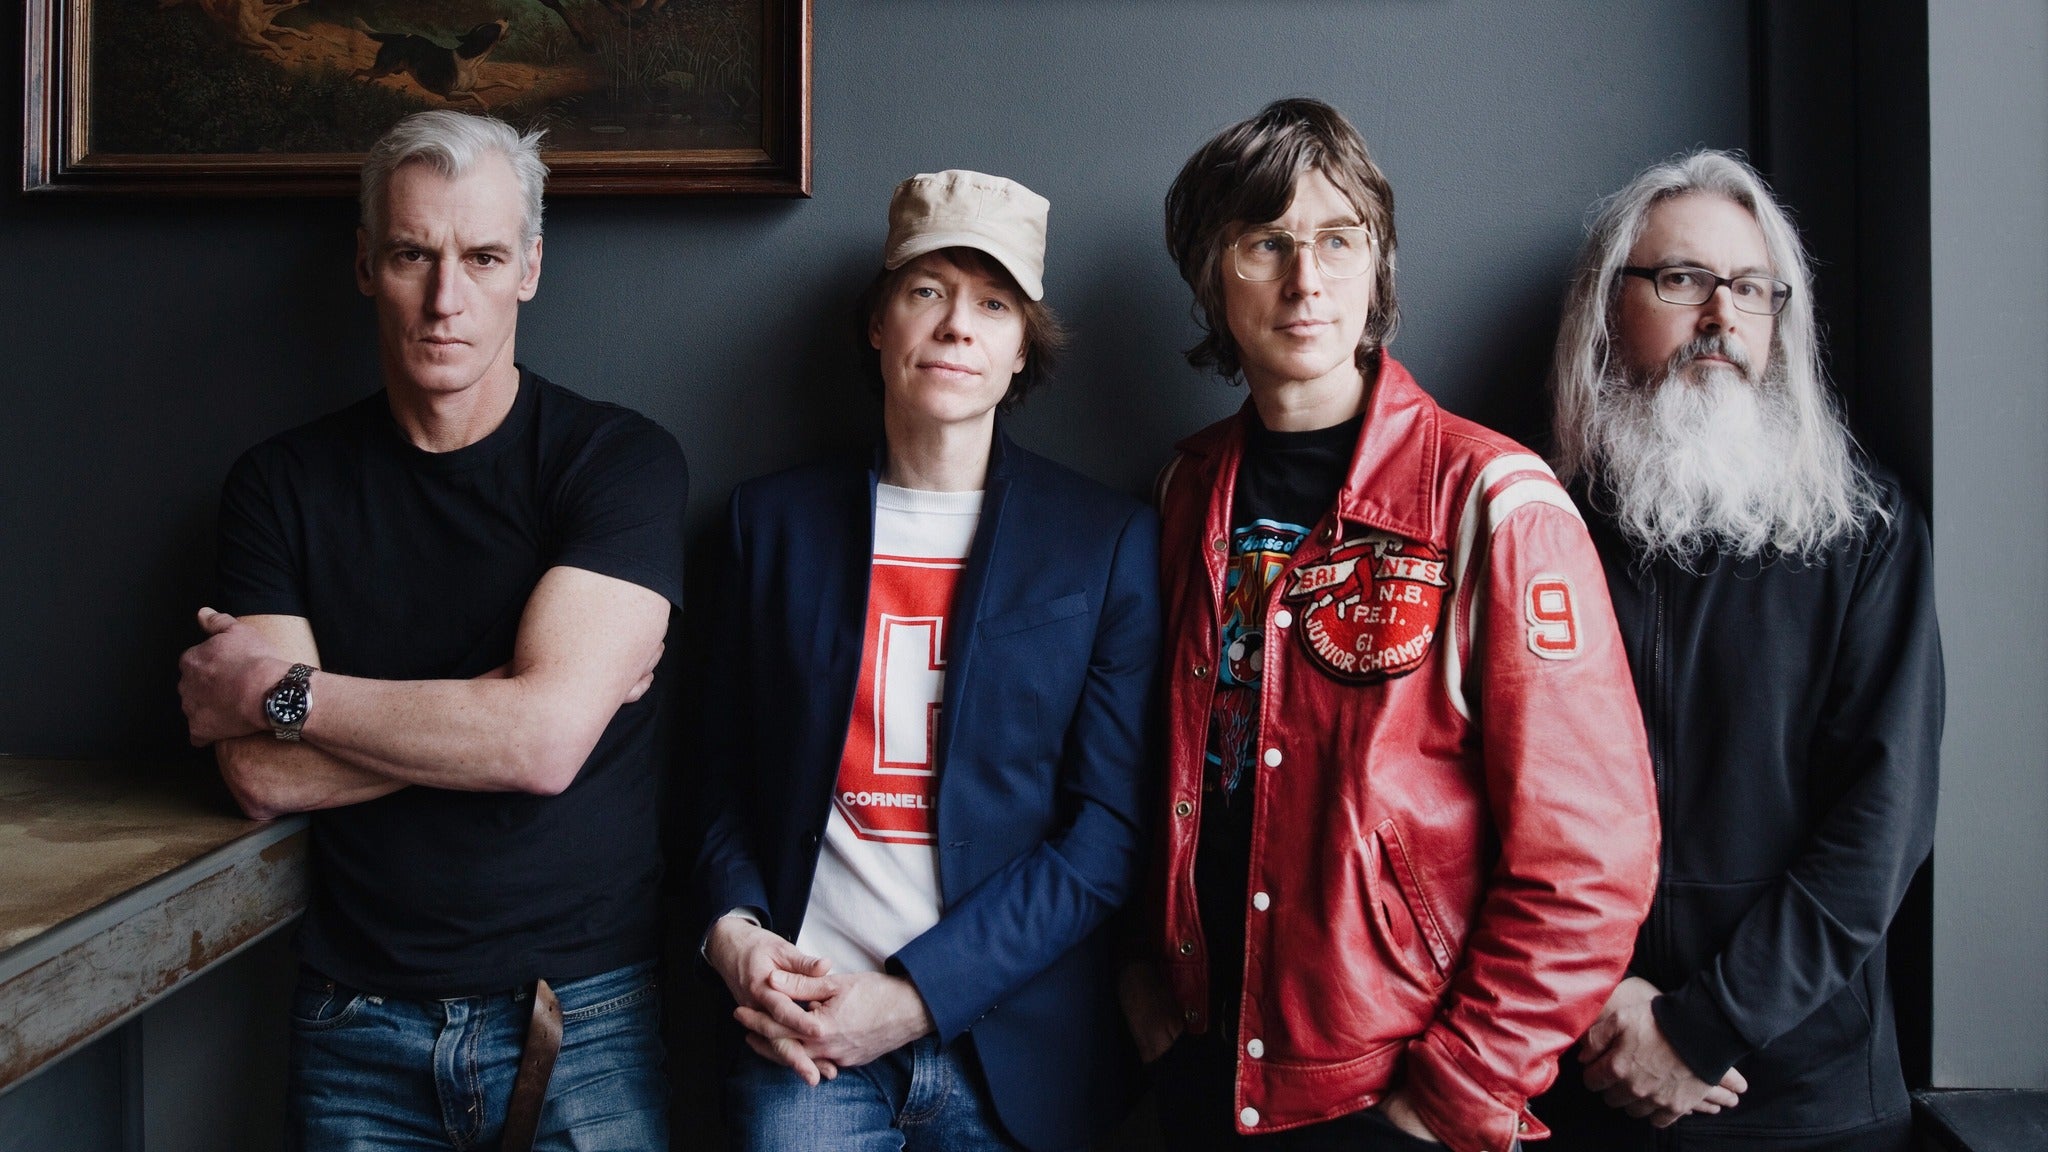 Image used with permission from Ticketmaster | Sloan tickets